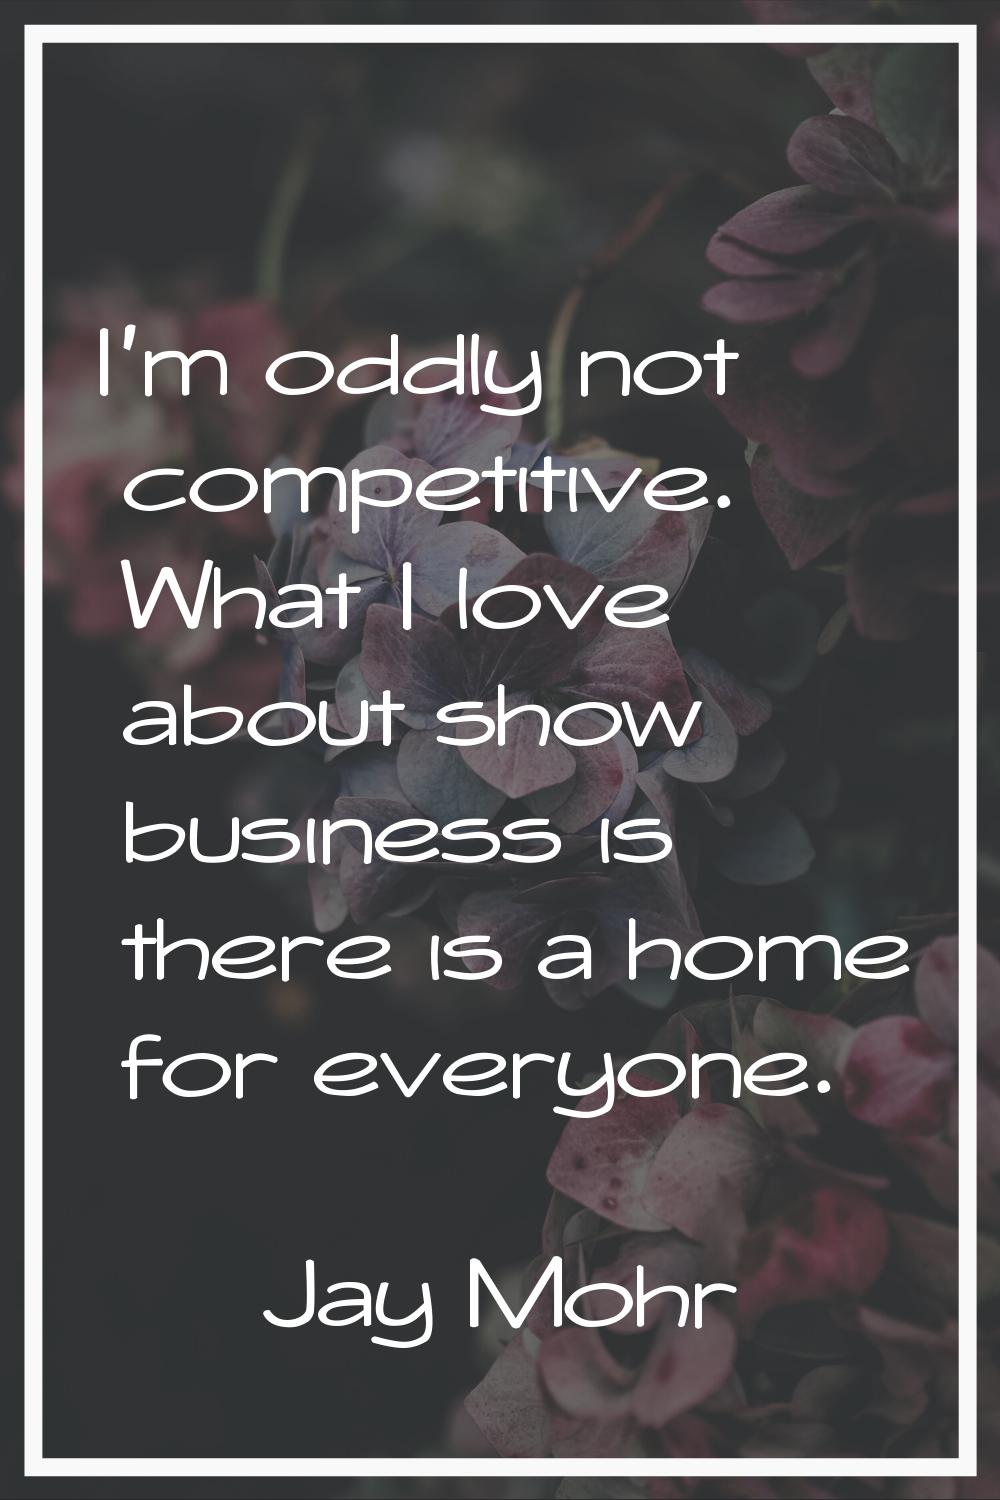 I'm oddly not competitive. What I love about show business is there is a home for everyone.